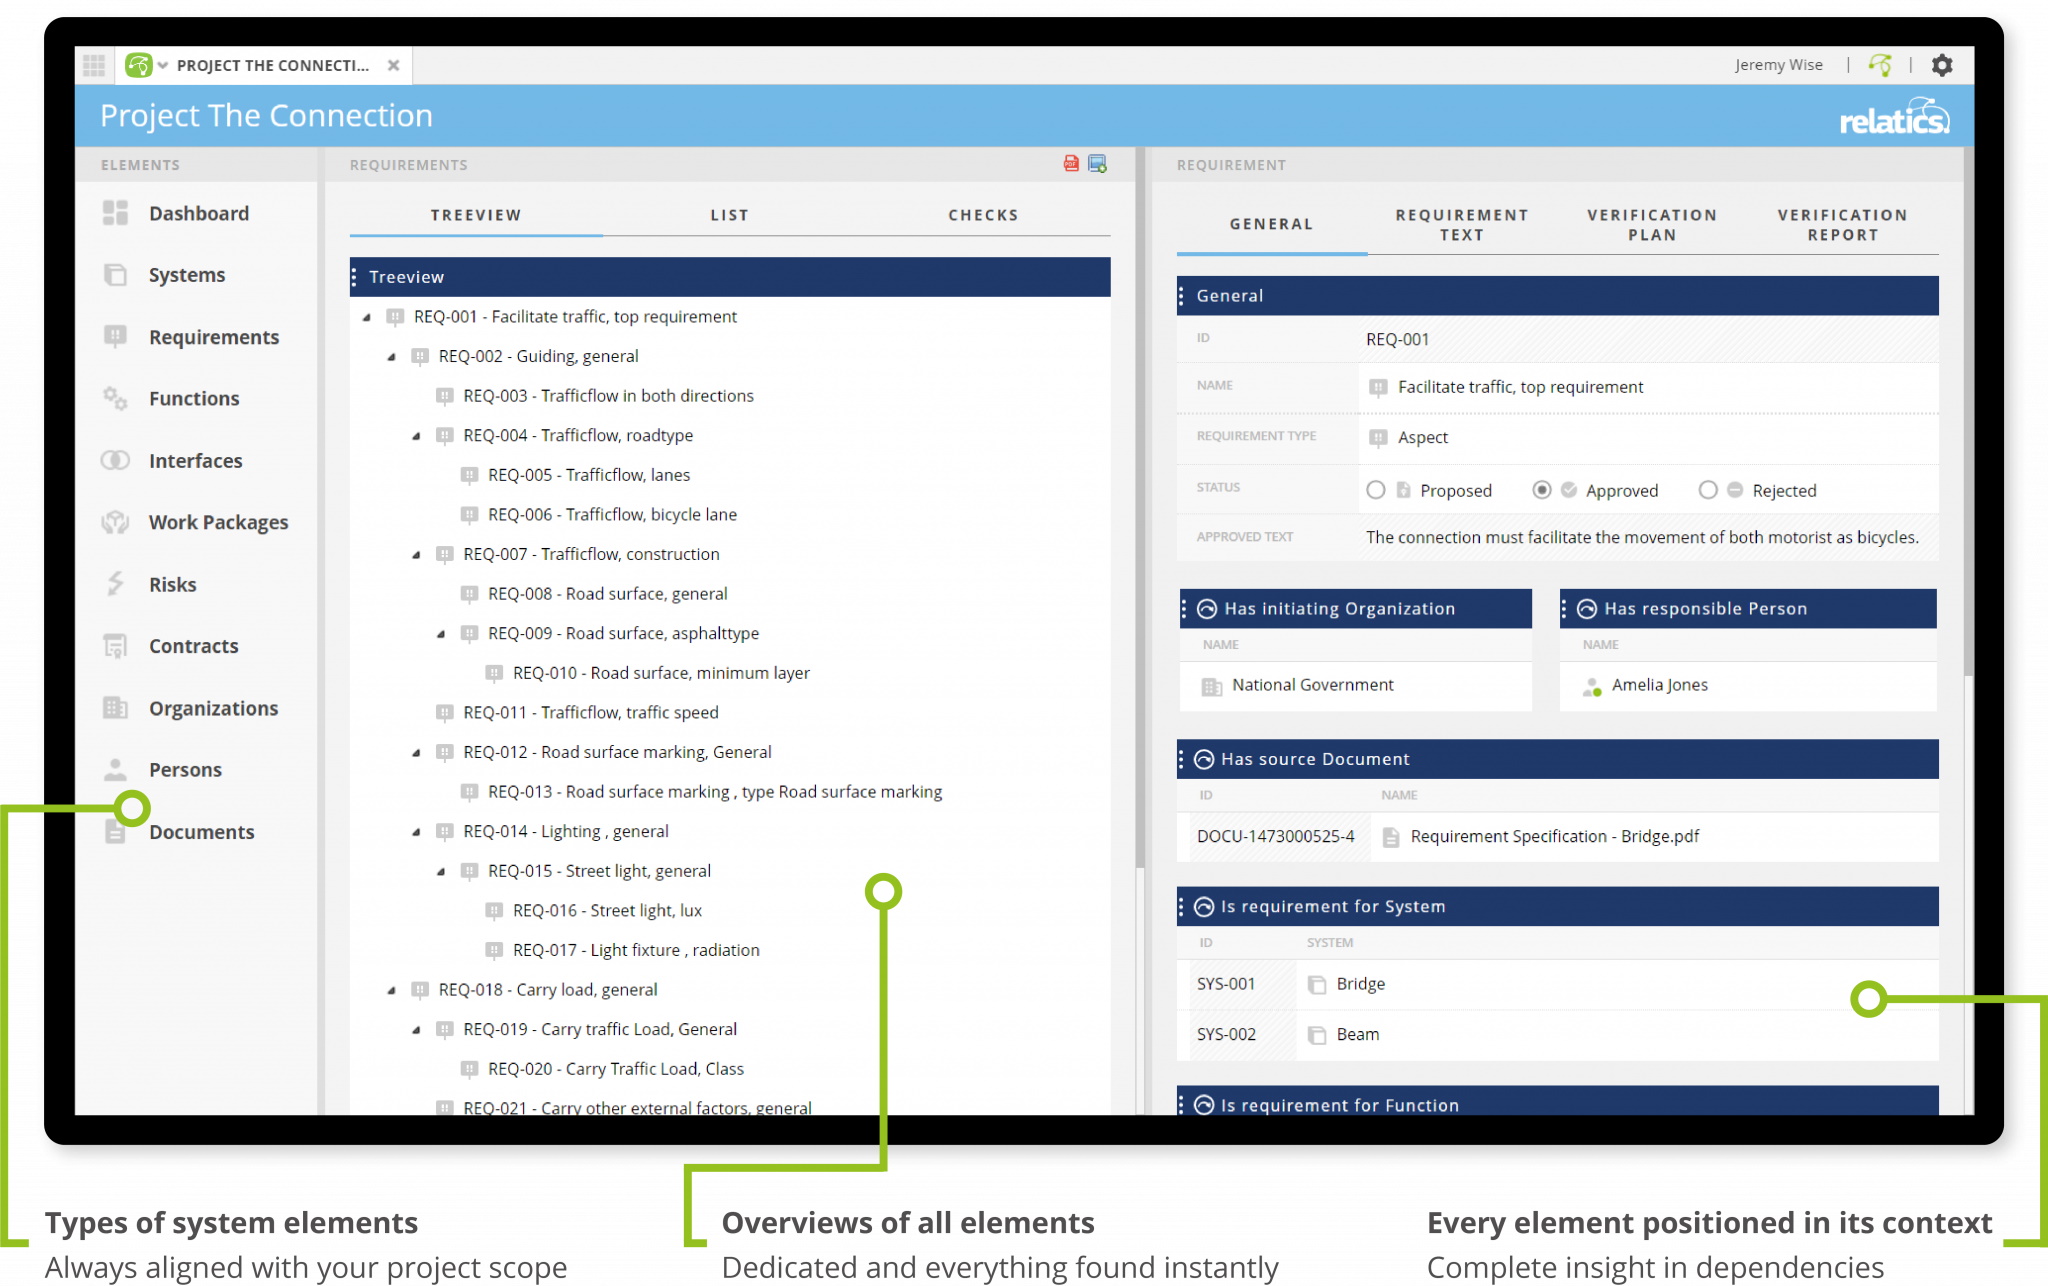 Screenshot from the Relatics user interface, showing the menu, the overview page showing all requirements in a hierarchical tree view, and the detail page showing all details of a single requirement.